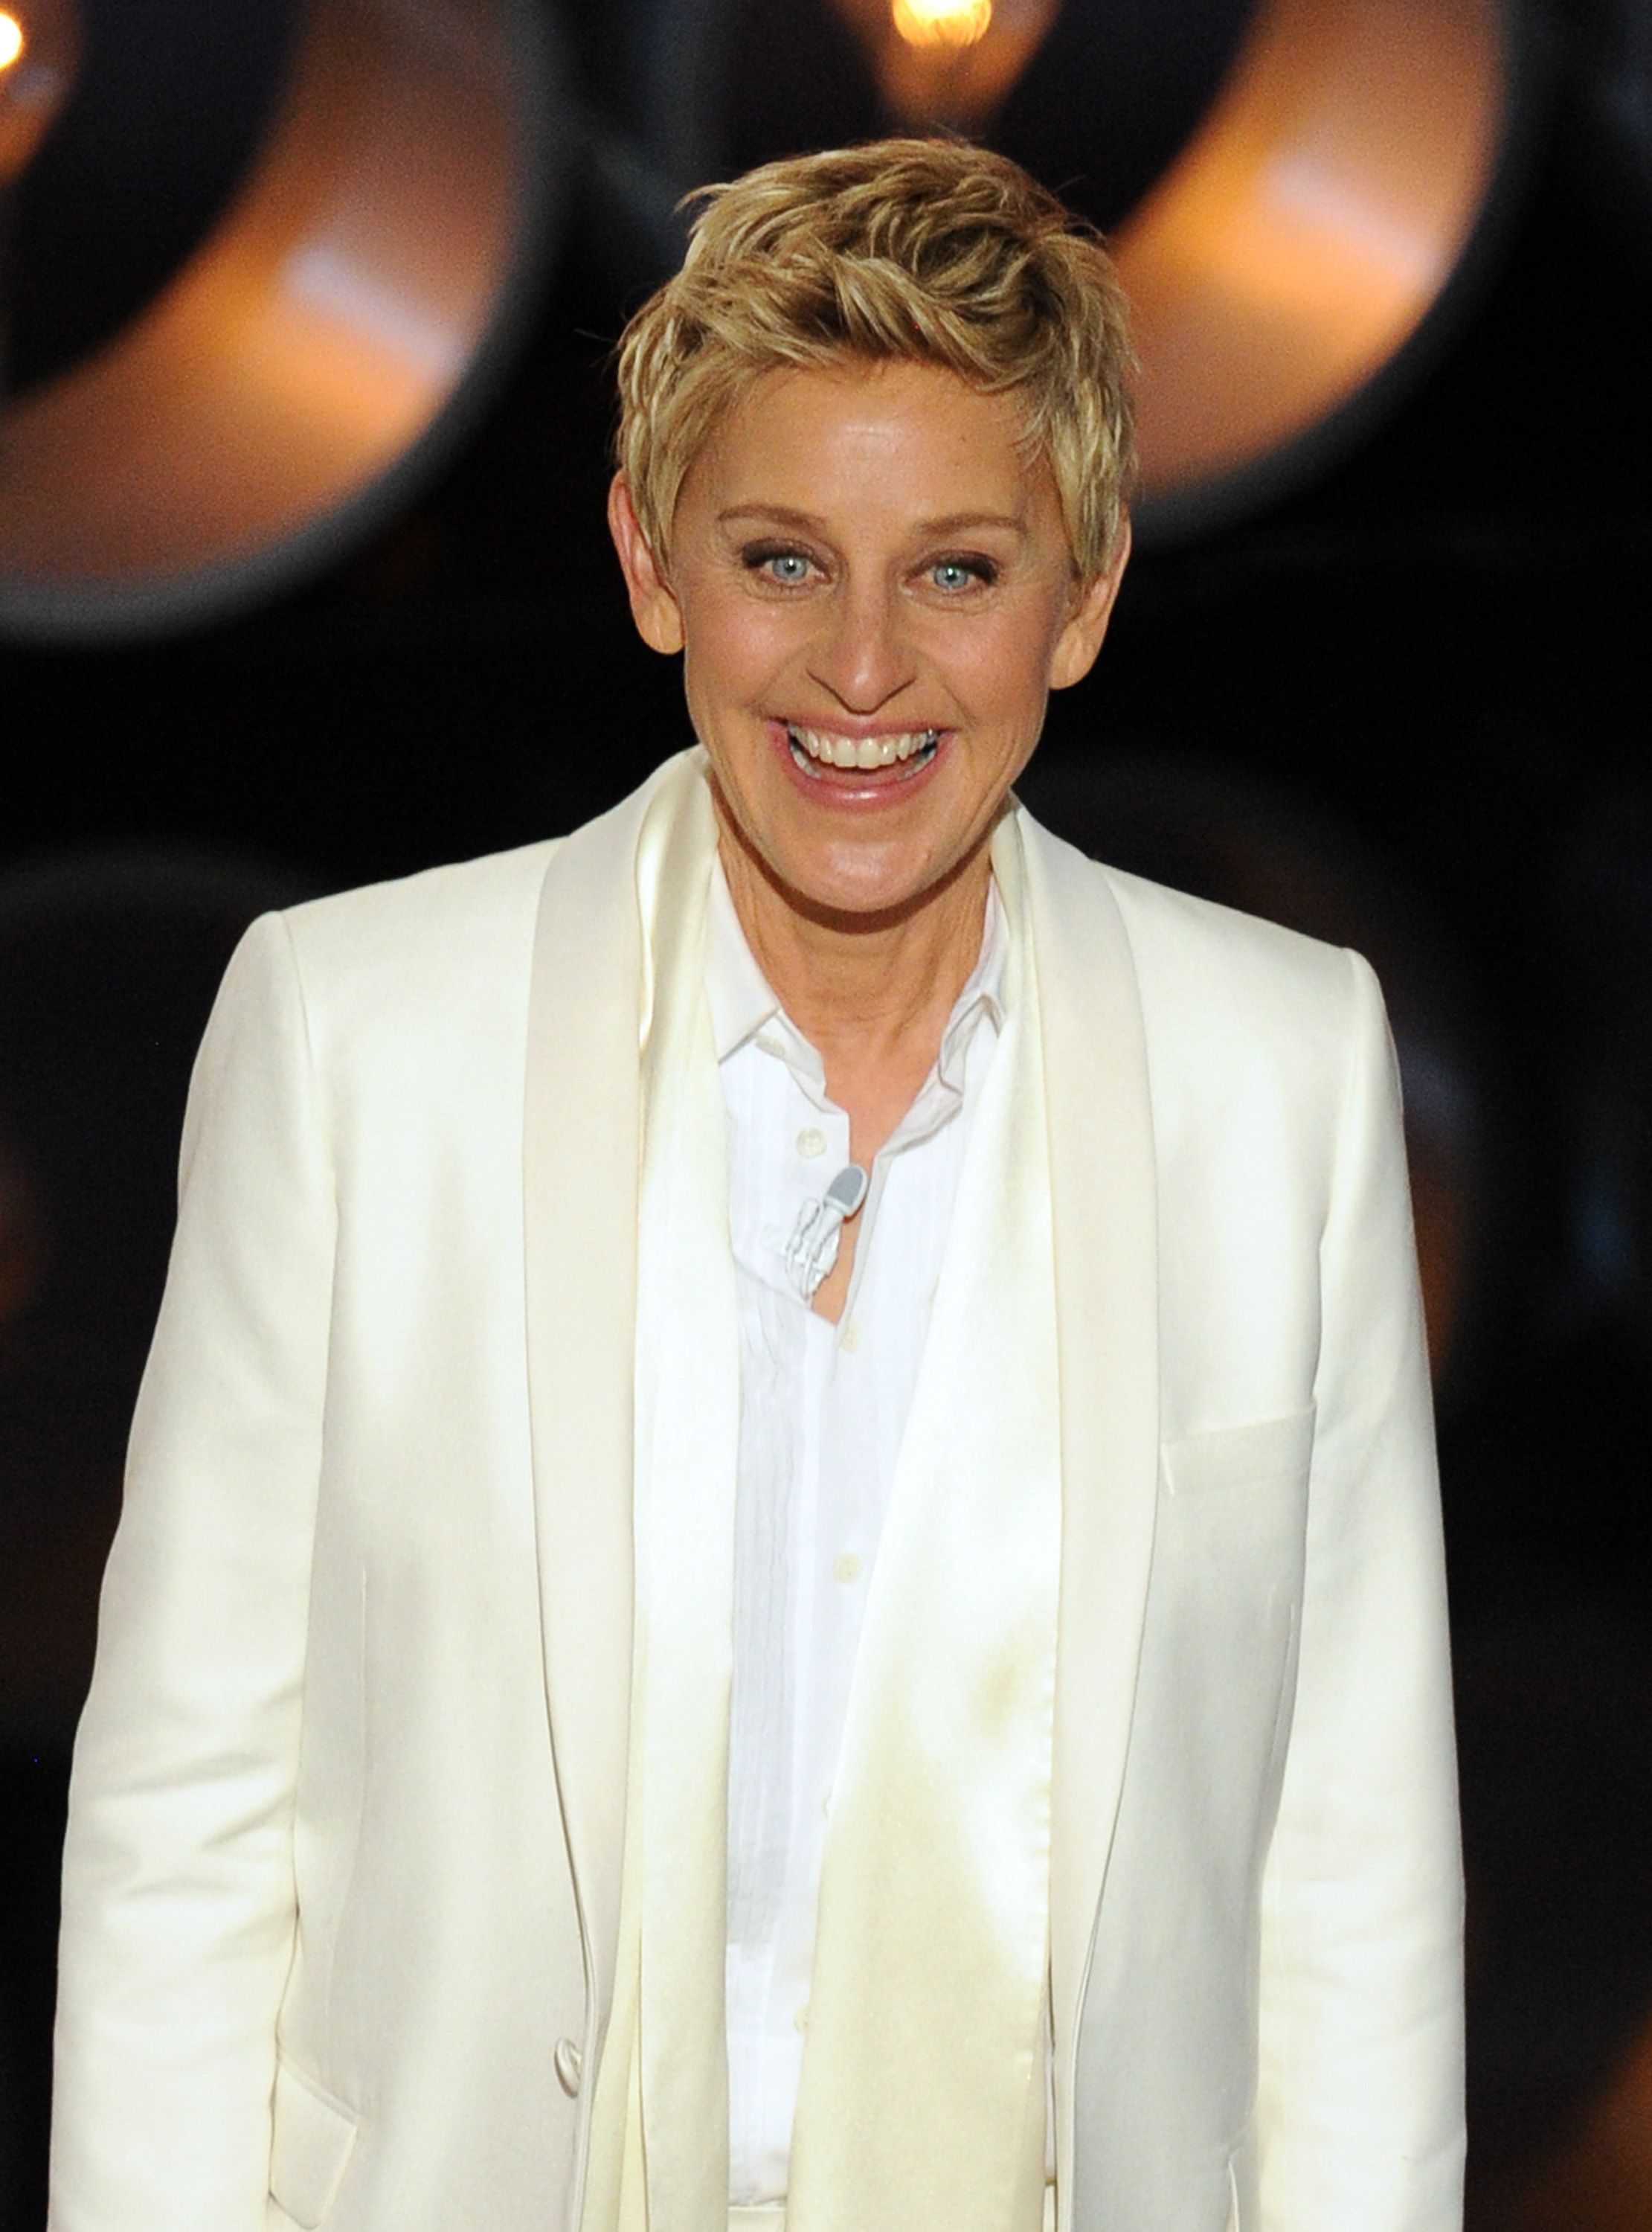 Ellen DeGeneres speaks onstage at the Oscars at the Dolby Theatre on March 2, 2014 | Photo: Getty Images